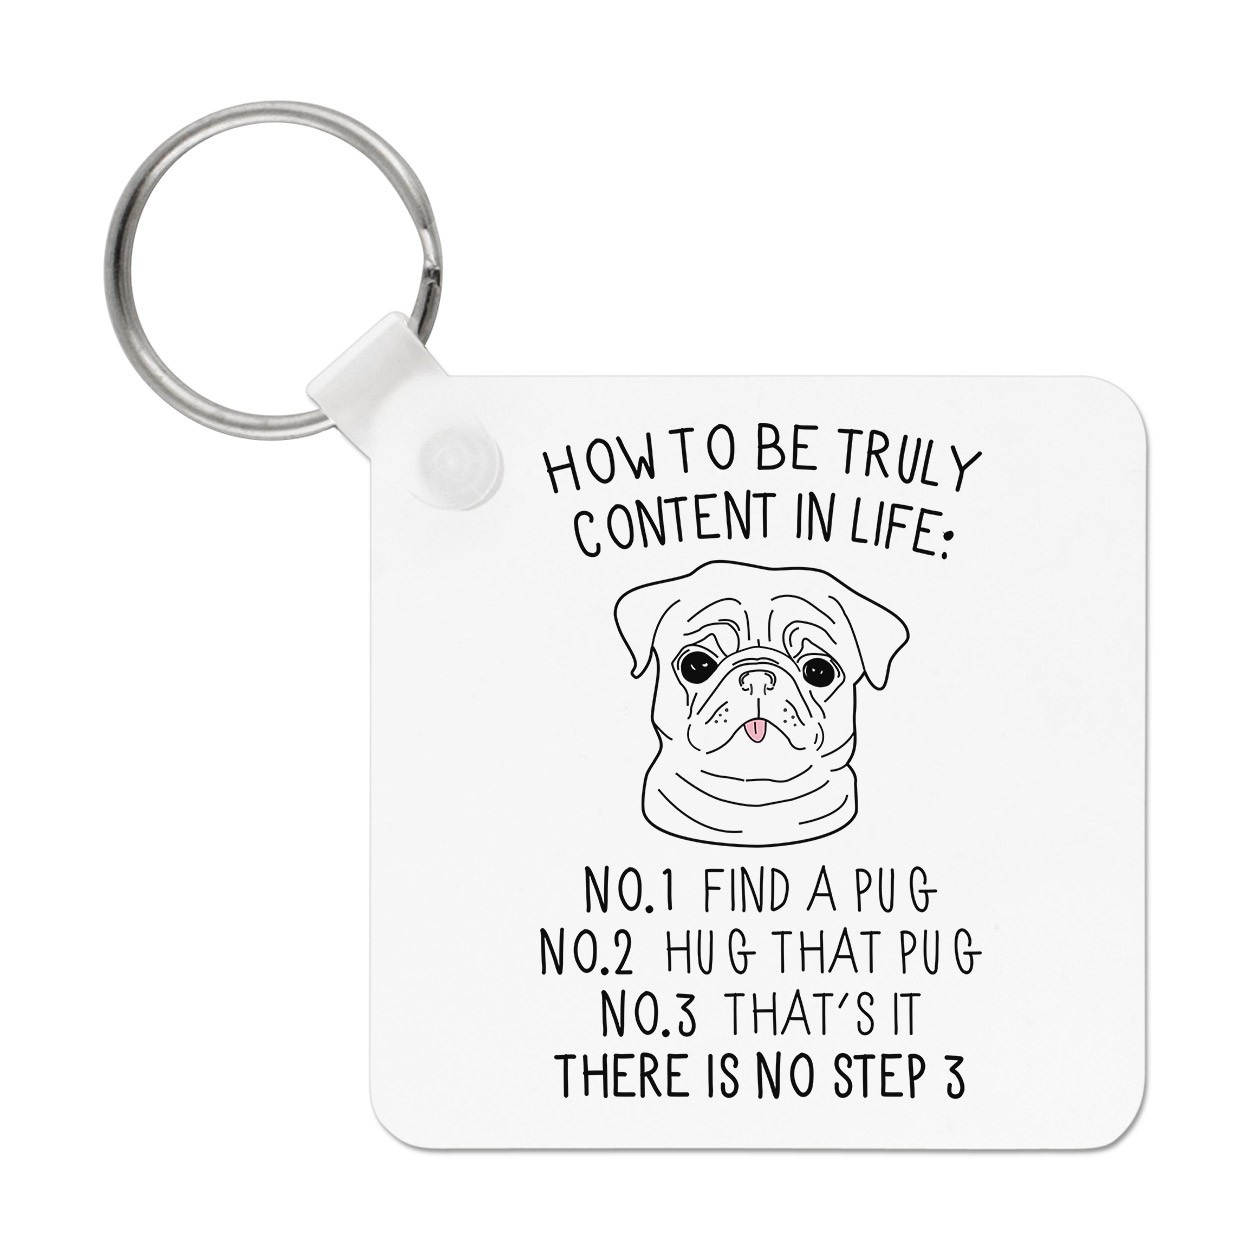 How To Be Truly Content In Life Pug Keyring Key Chain